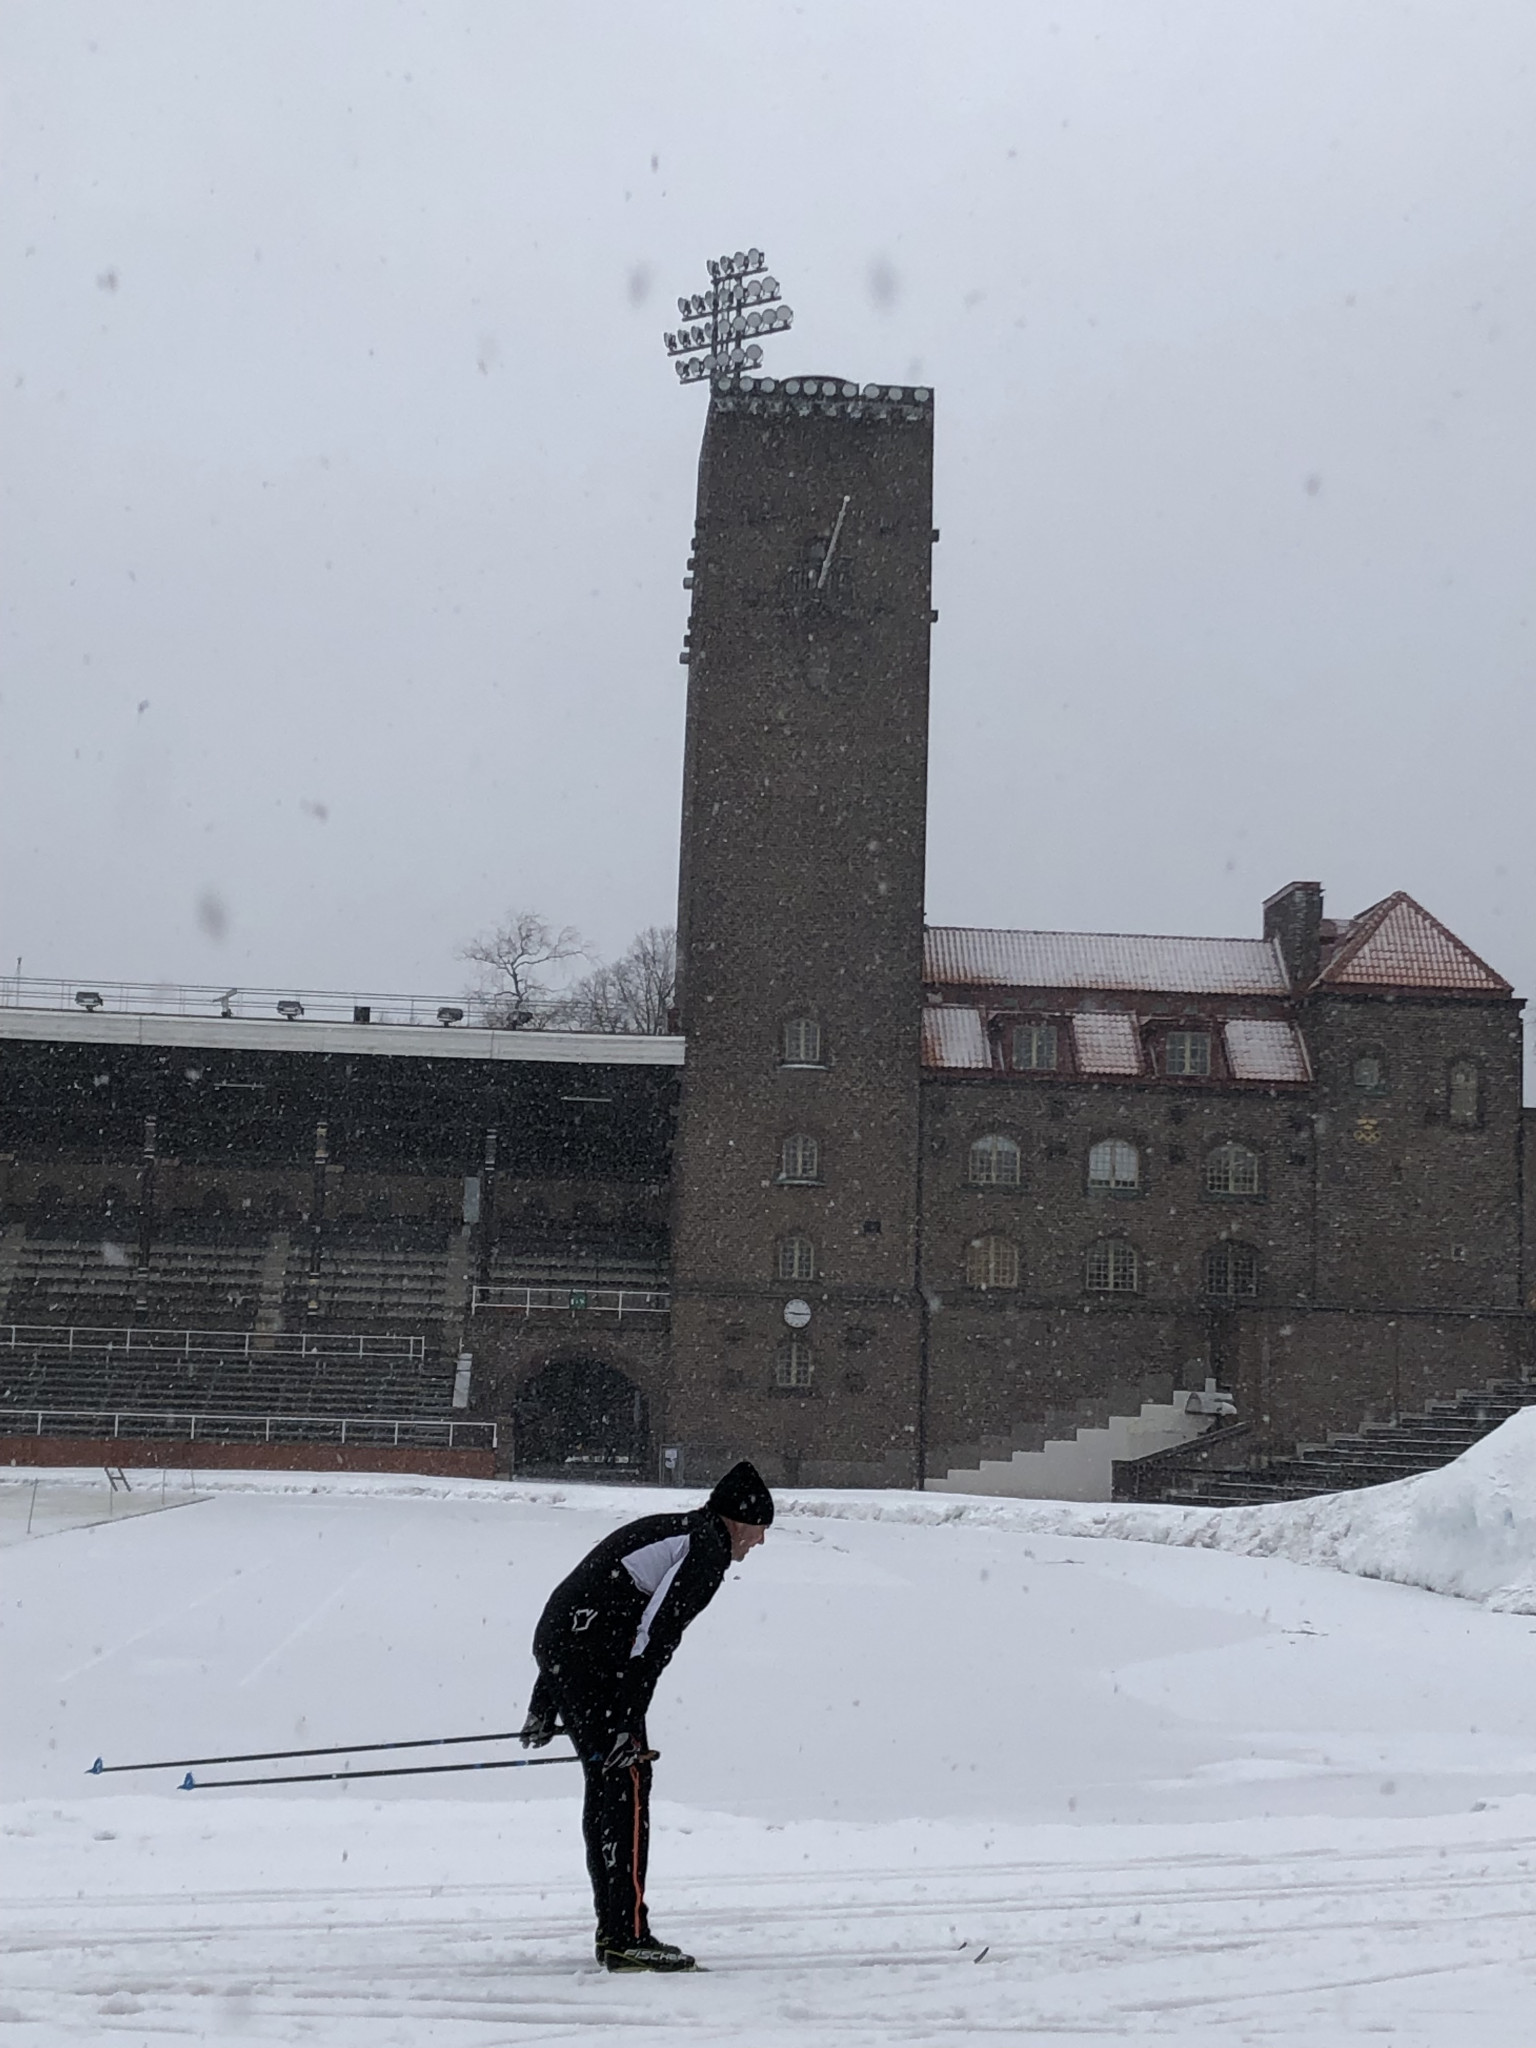 Even as the IOC Evaluation Commission were inspecting the Olympic Stadium local cross-country skiers were practicing ©ITG